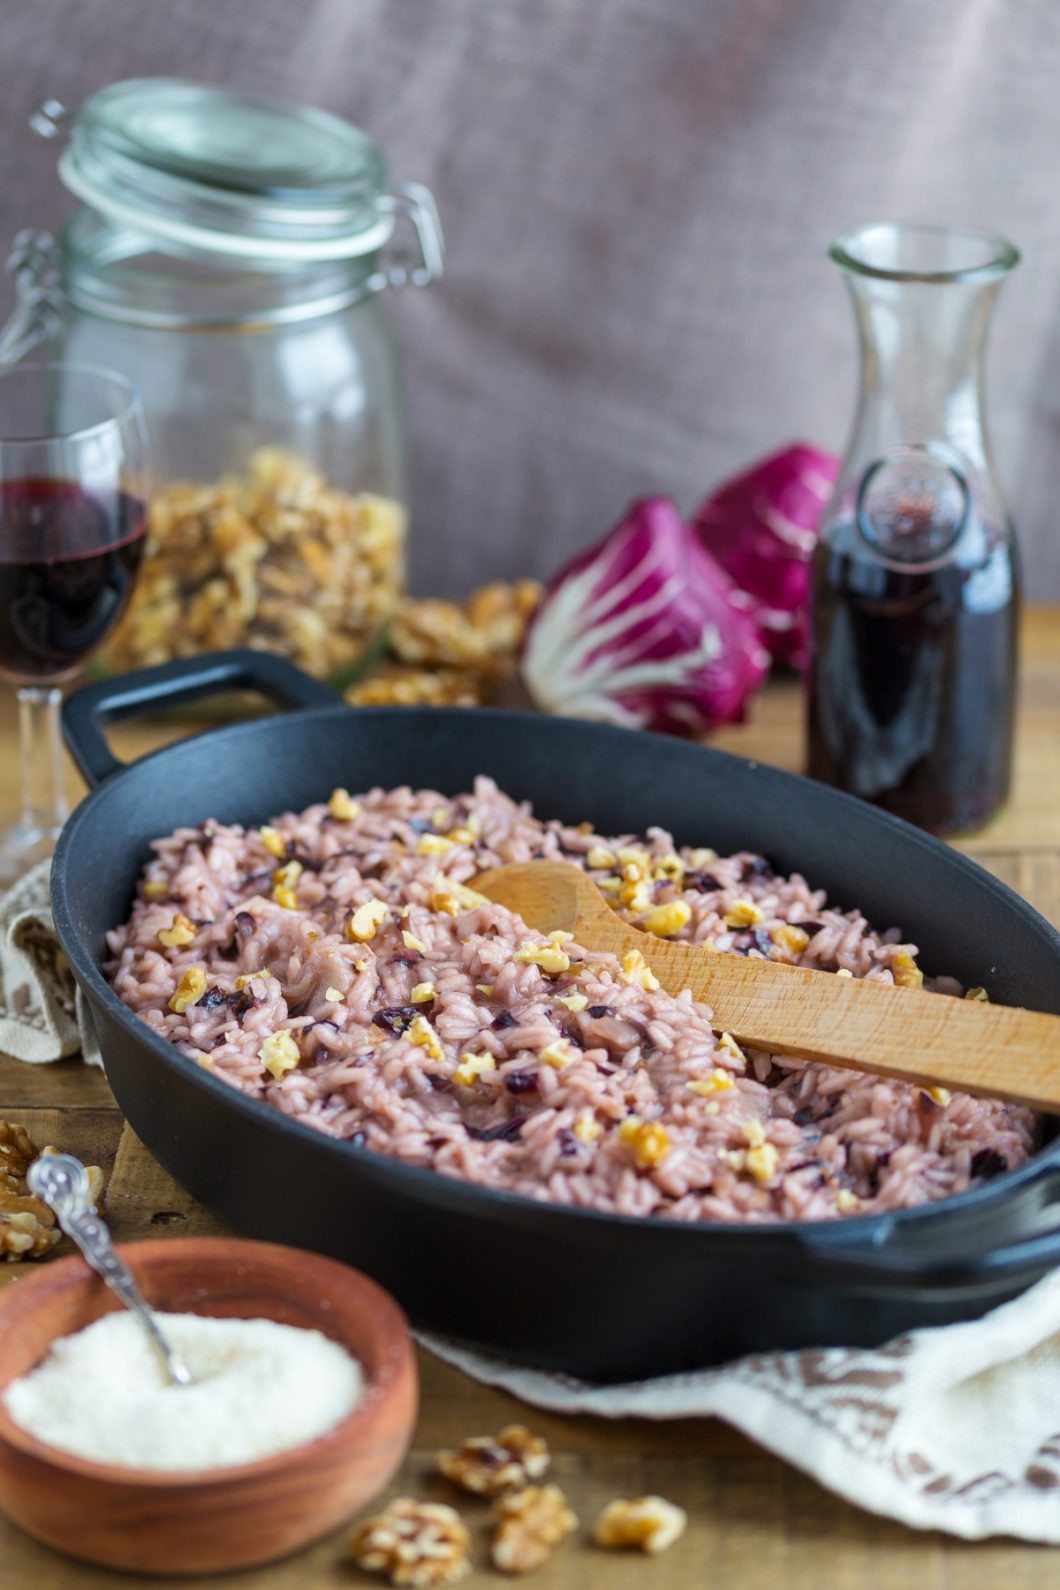 Red wine risotto with radicchio and walnuts.